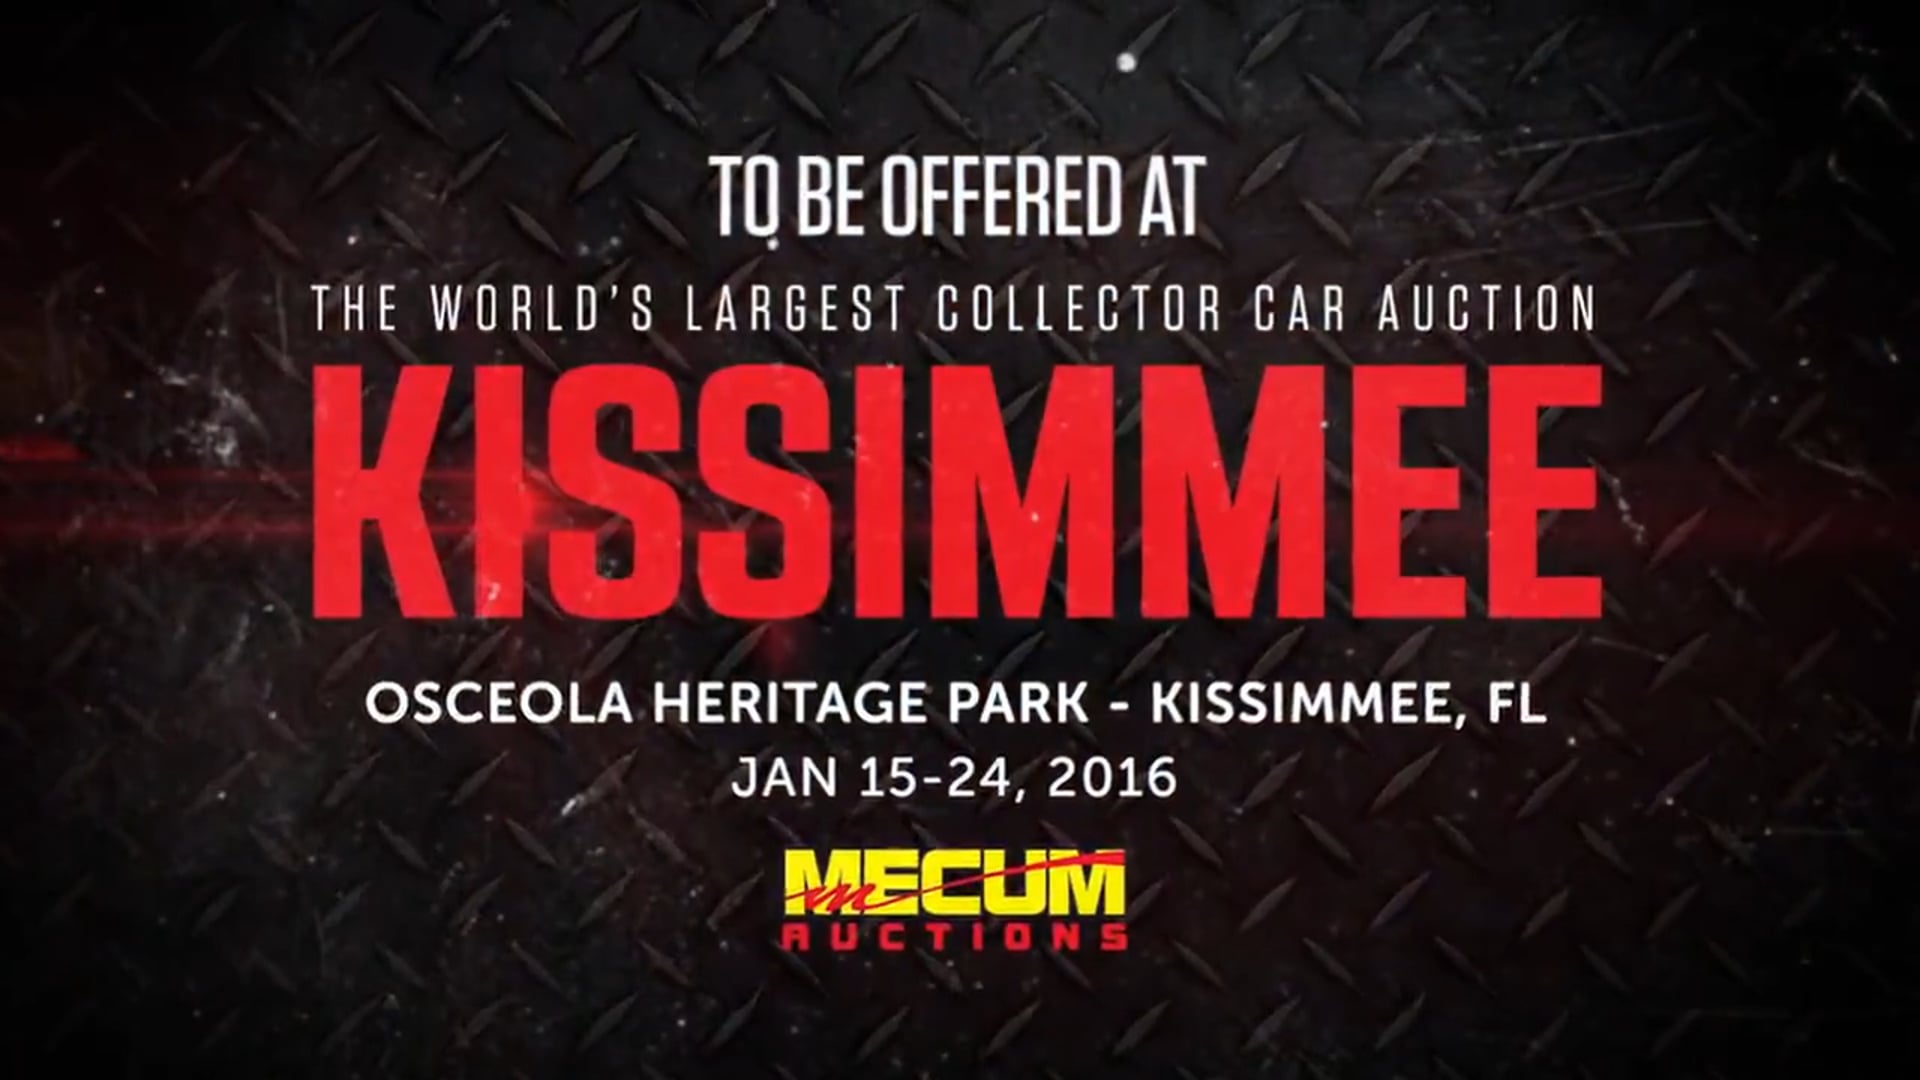 The World's Largest Collector Car Auction - Mecum Kissimmee 2016 - January 15-24